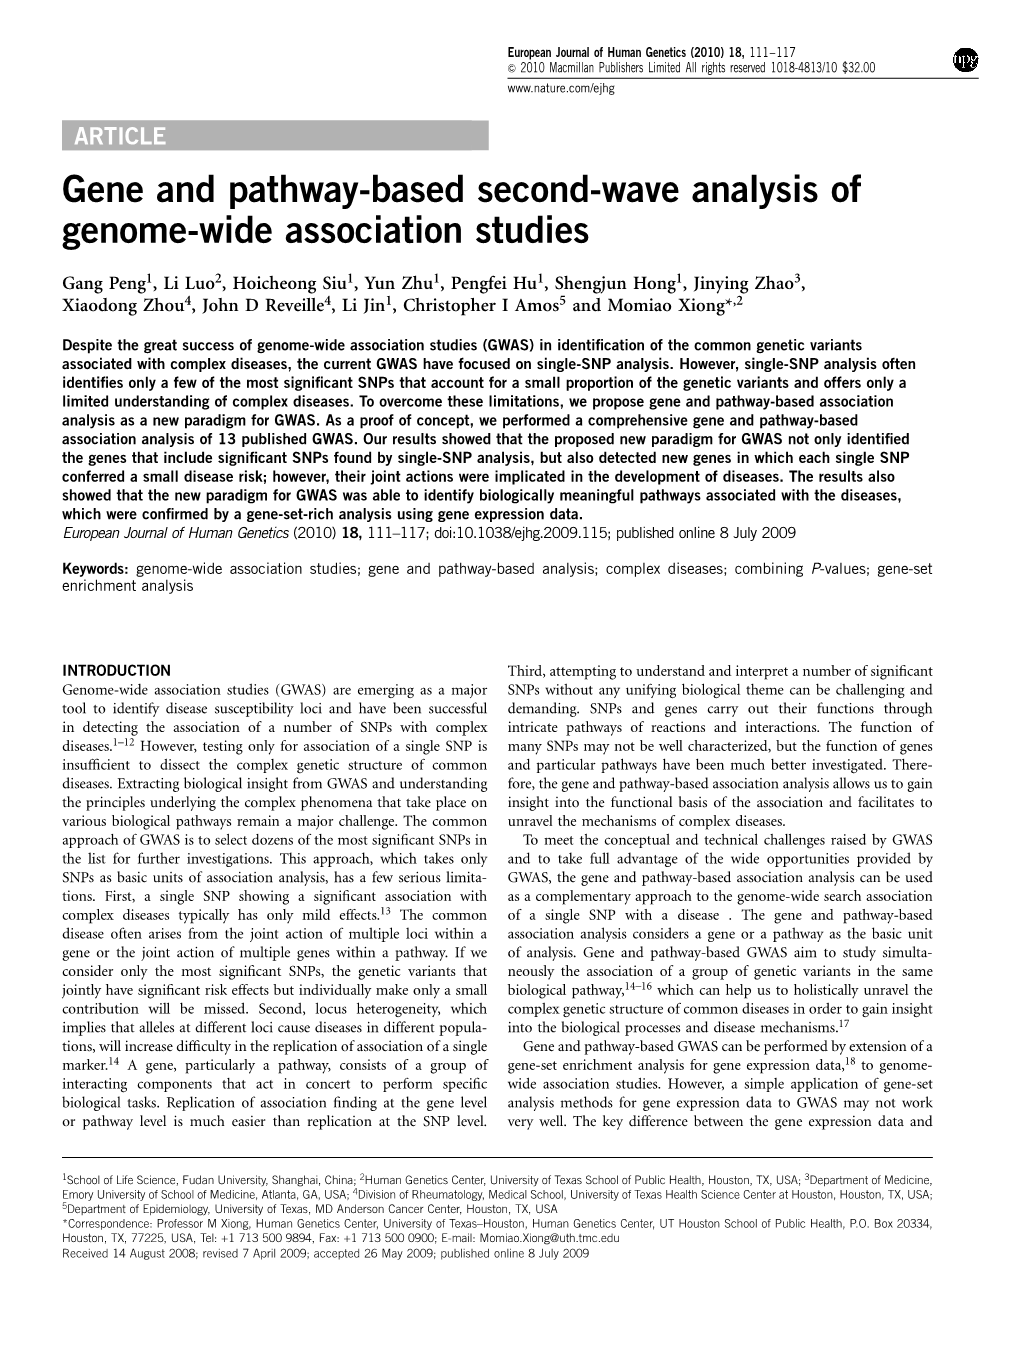 Gene and Pathway-Based Second-Wave Analysis of Genome-Wide Association Studies